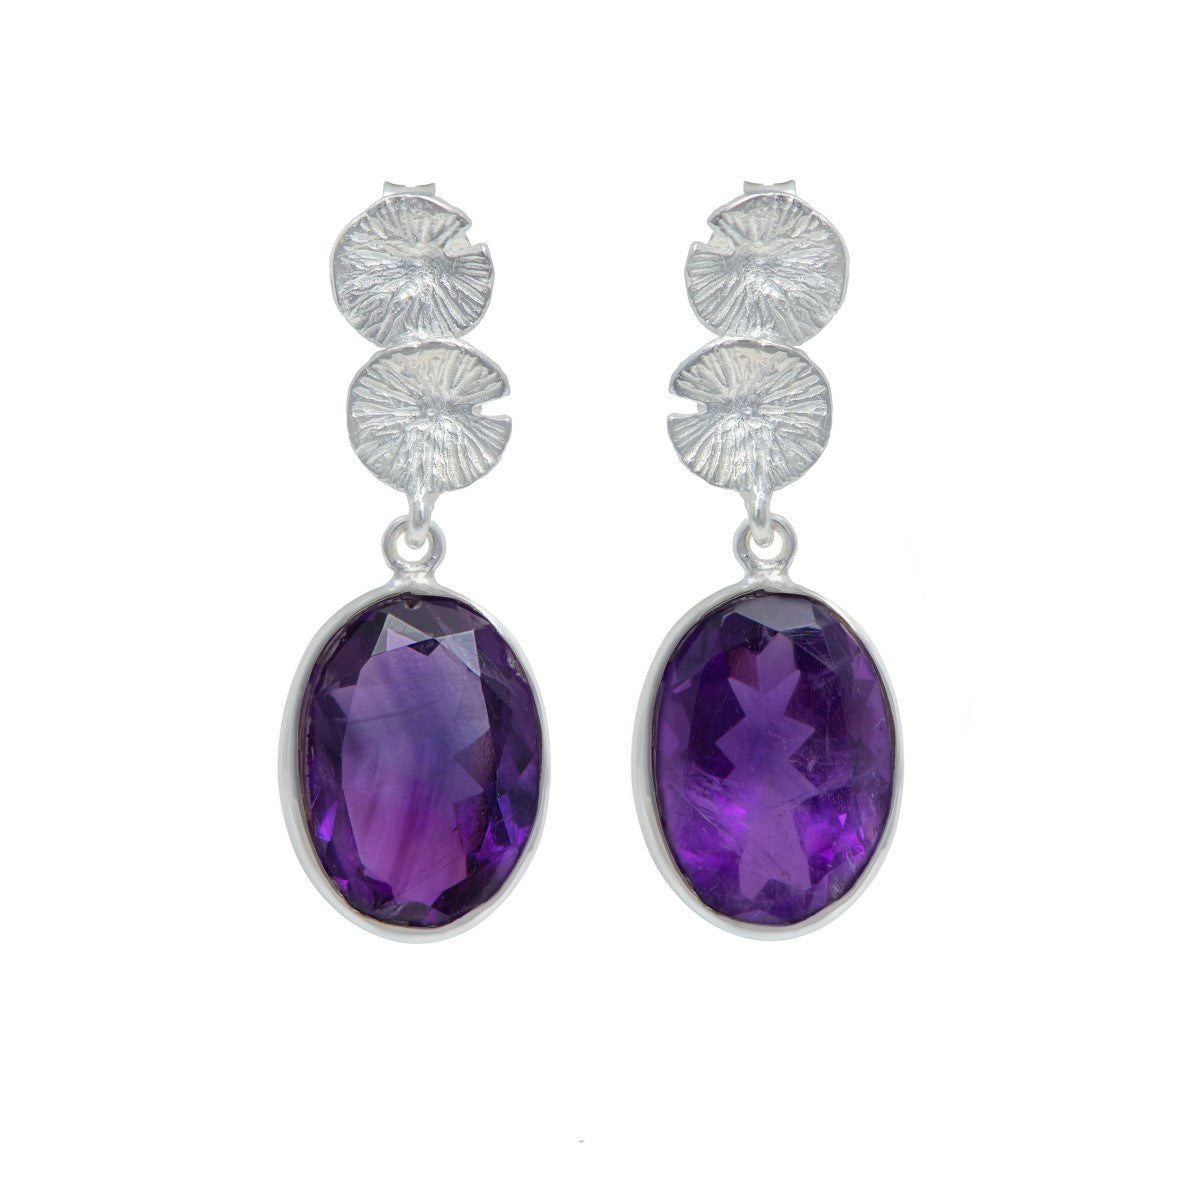 Lily Pad Earrings in Sterling Silver with an Amethyst Gemstone Drop